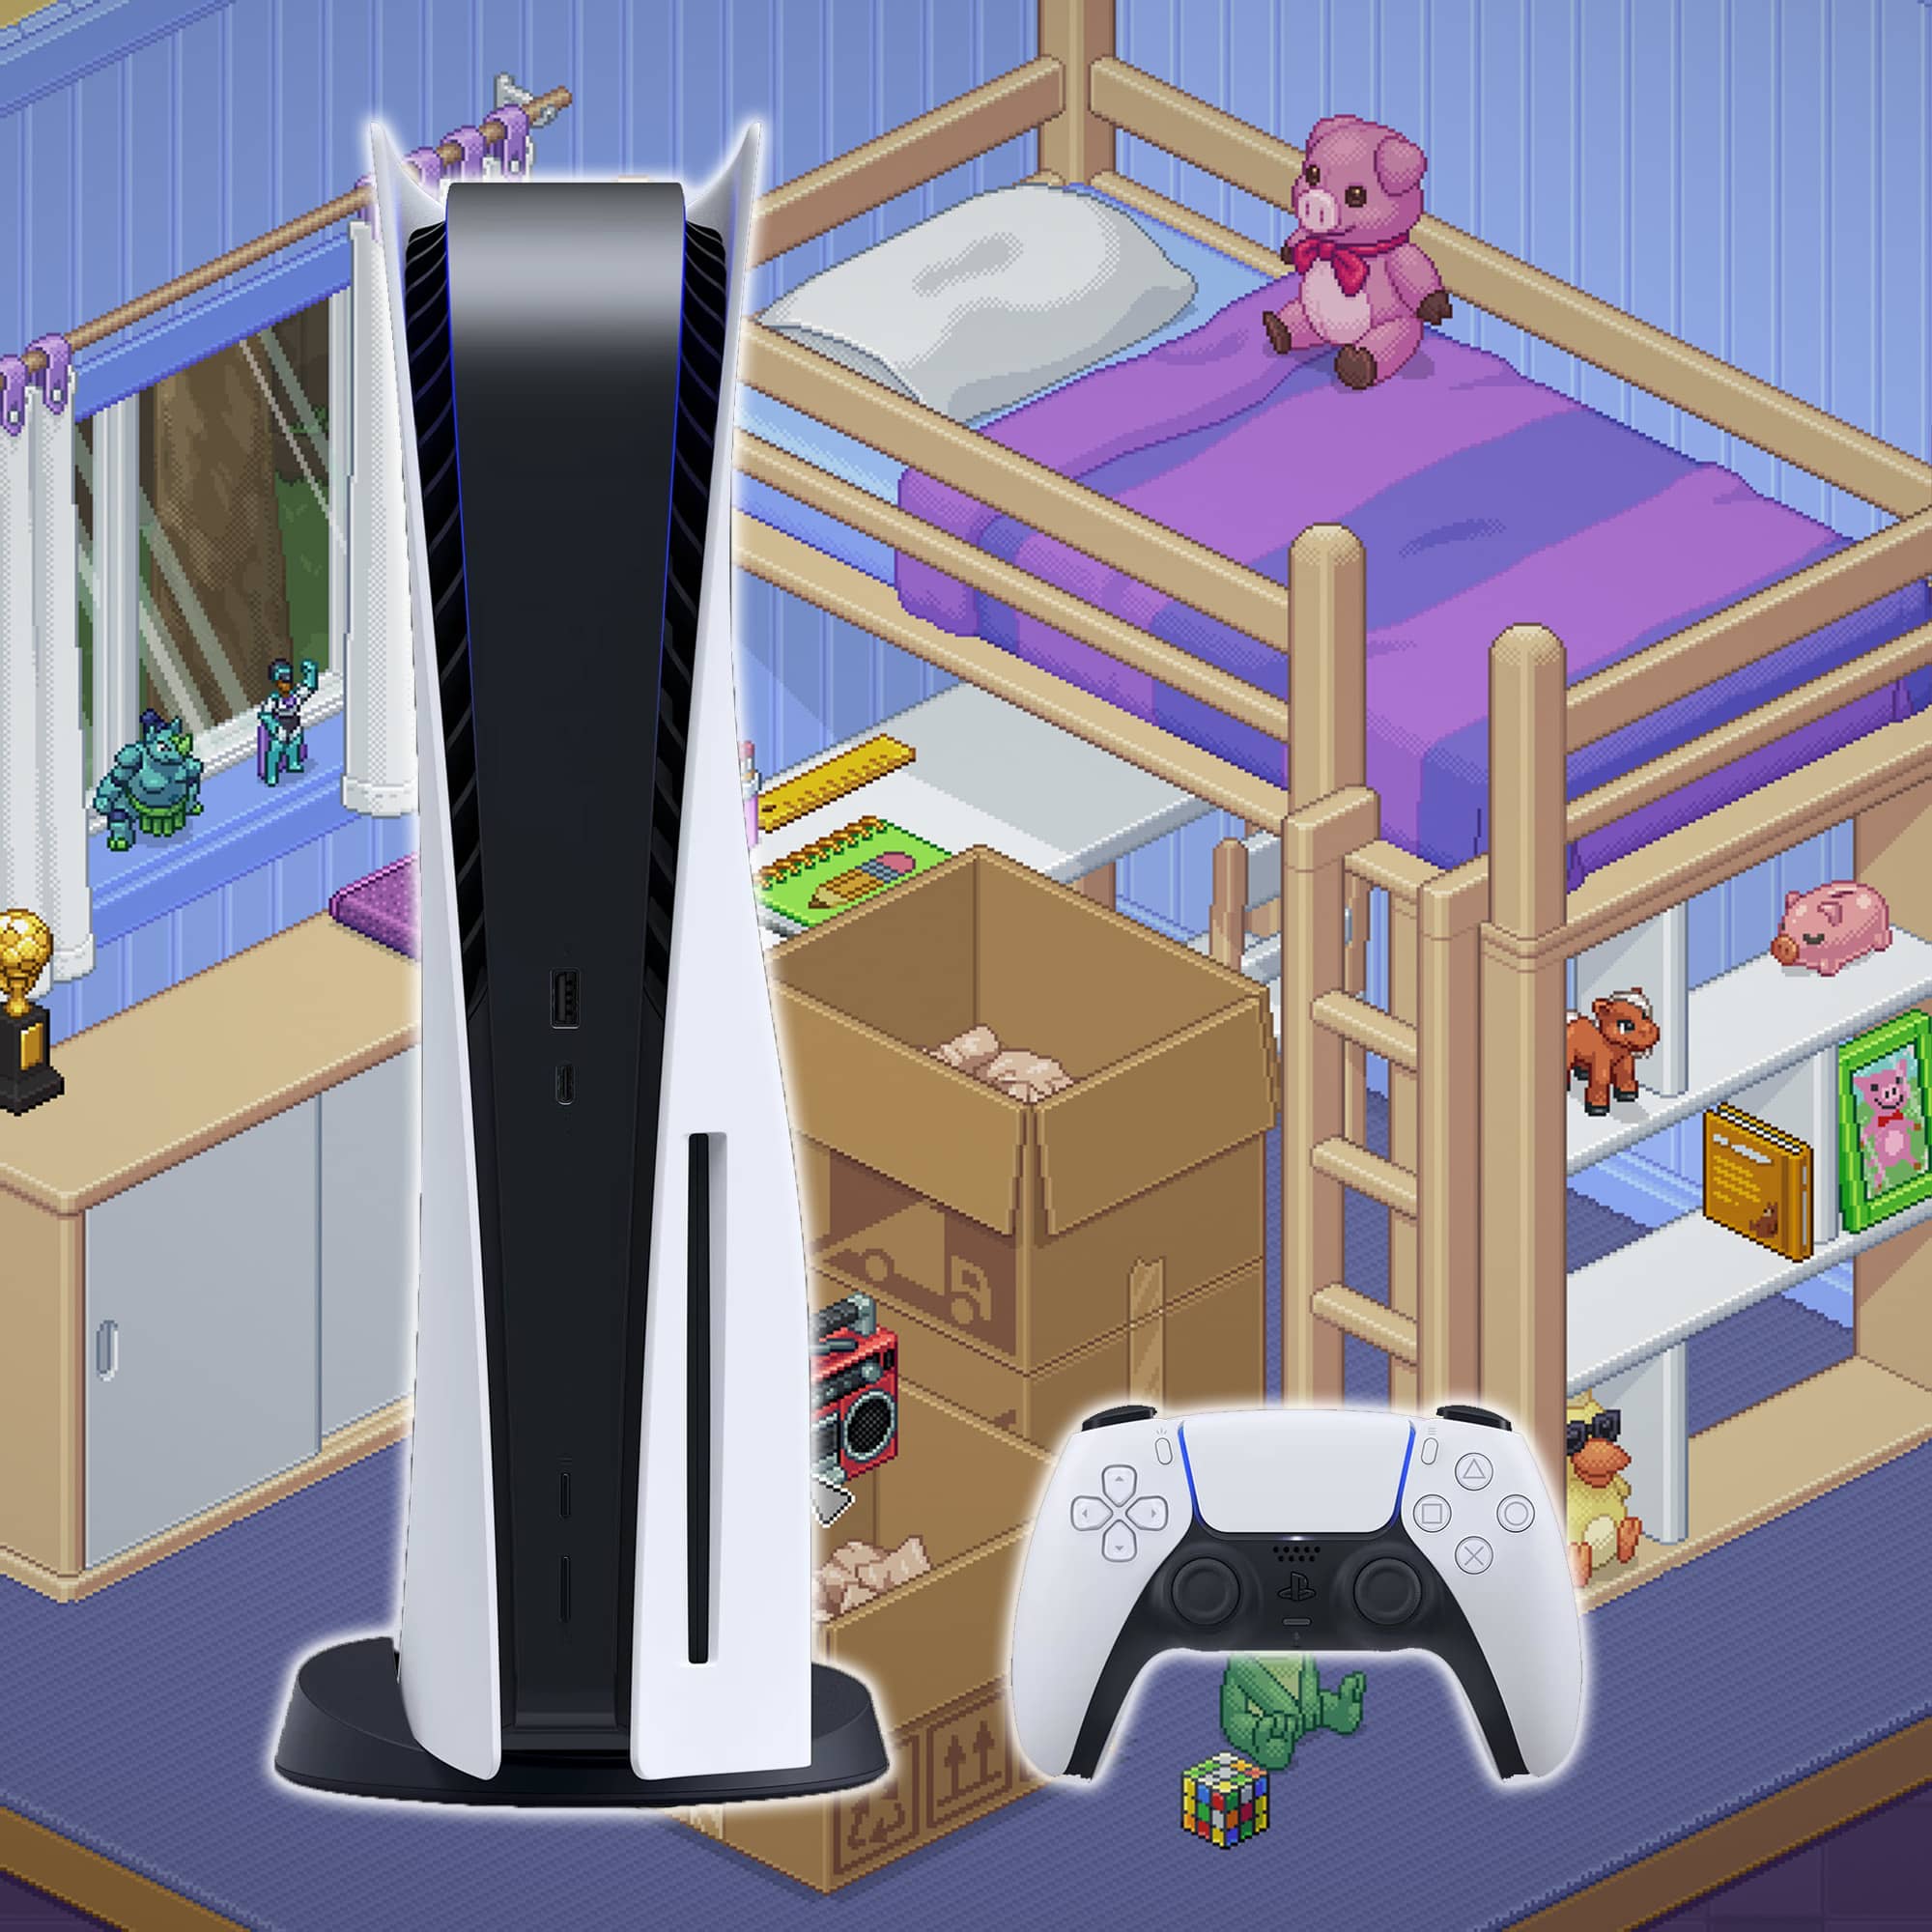 A screenshot from Unpacking with a cut-out image of a PS5 console and DualShock wireless controller on top.